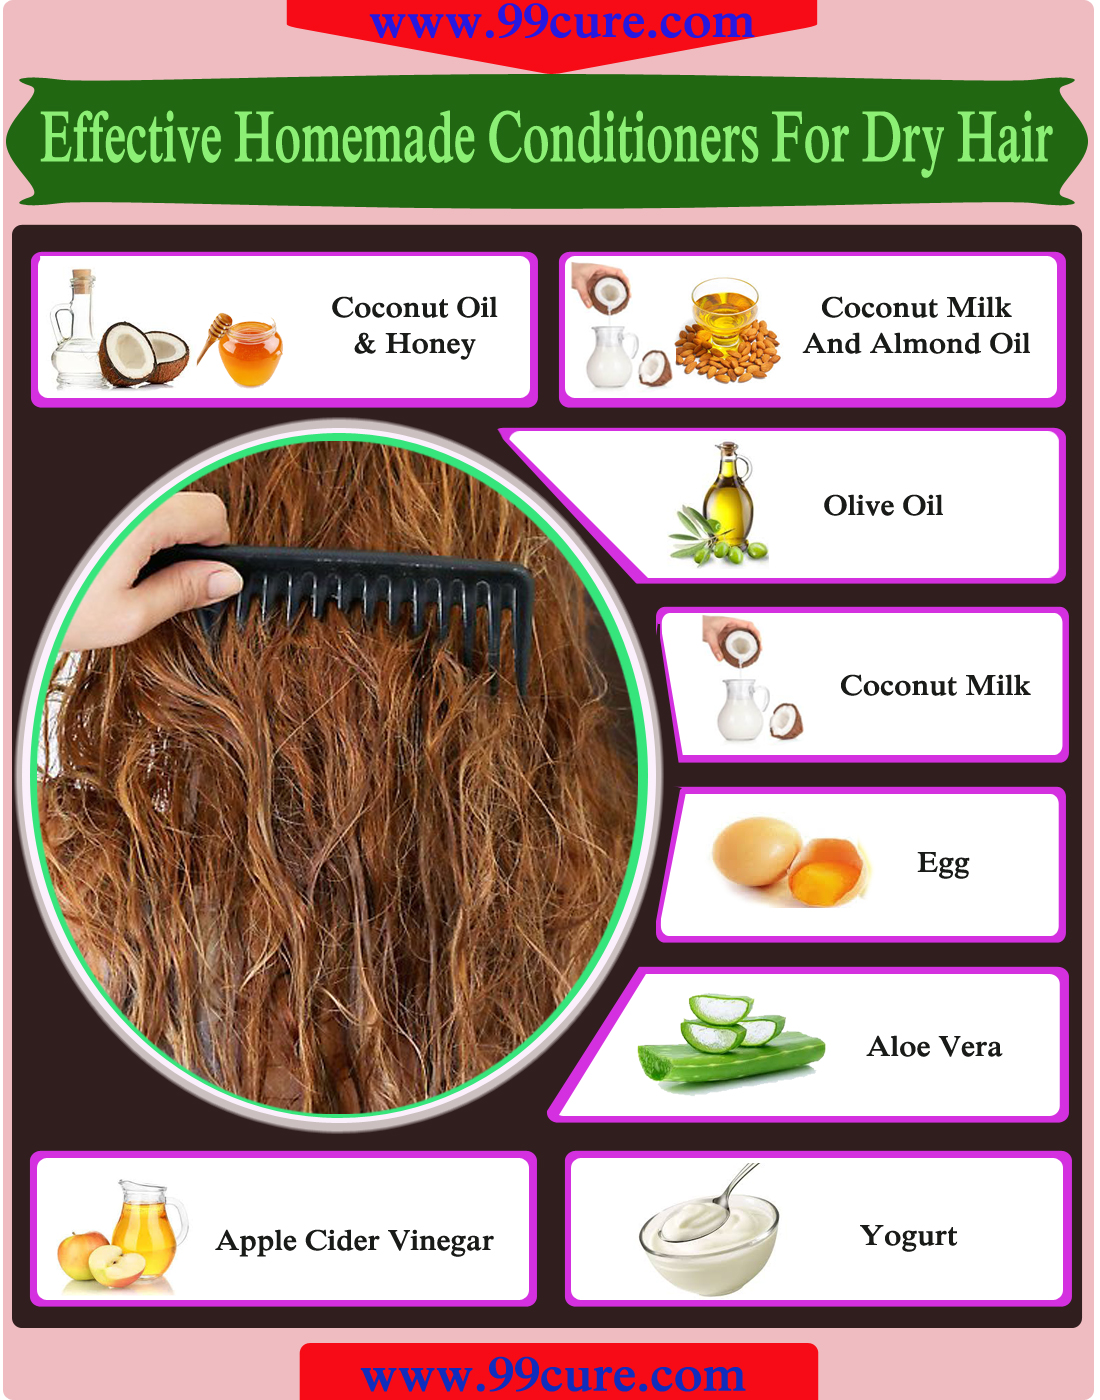 Effective Homemade Conditioners For Dry Hair